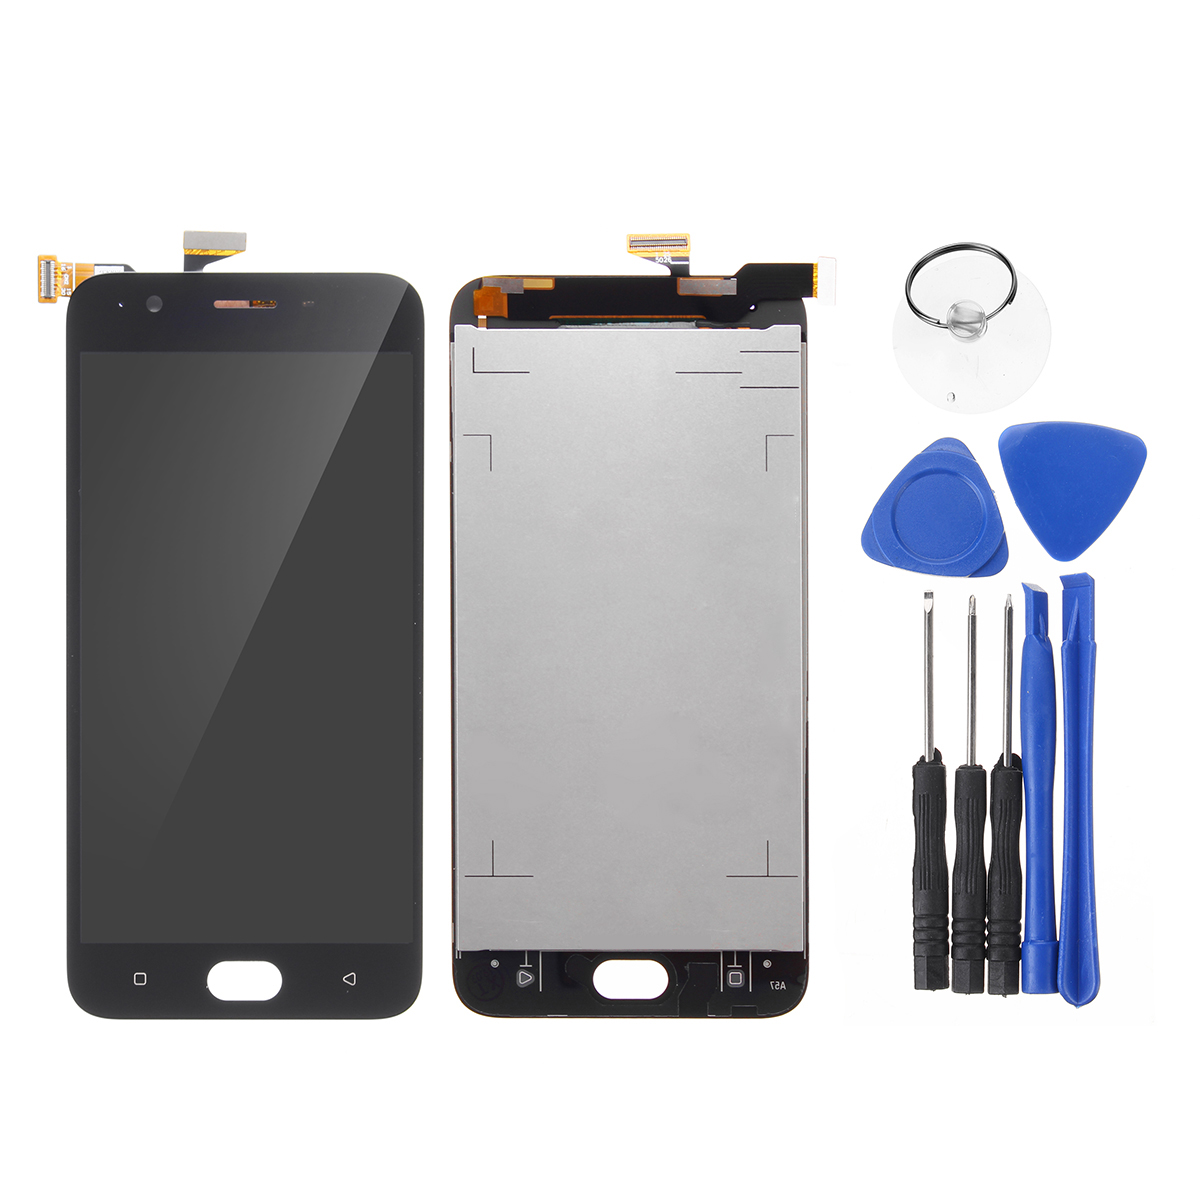 

LCD Display + Touch Screen Digitizer Replacement With Repair Tools For OPPO A57 A57M SP3672W